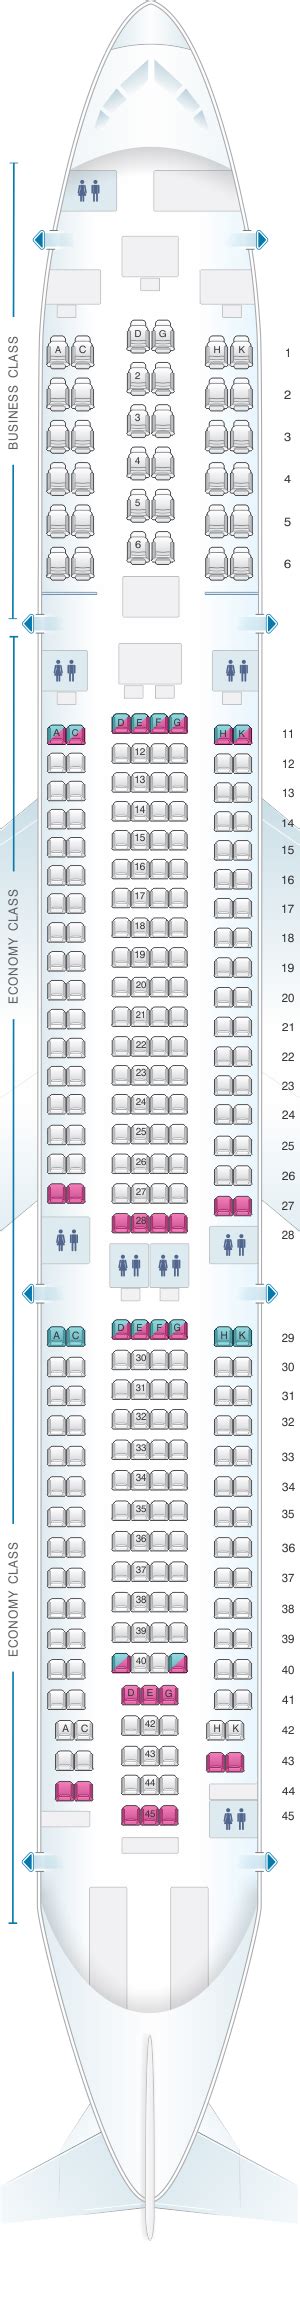 Seat Map Aeroflot Russian Airlines Airbus A330 300 Config3 China